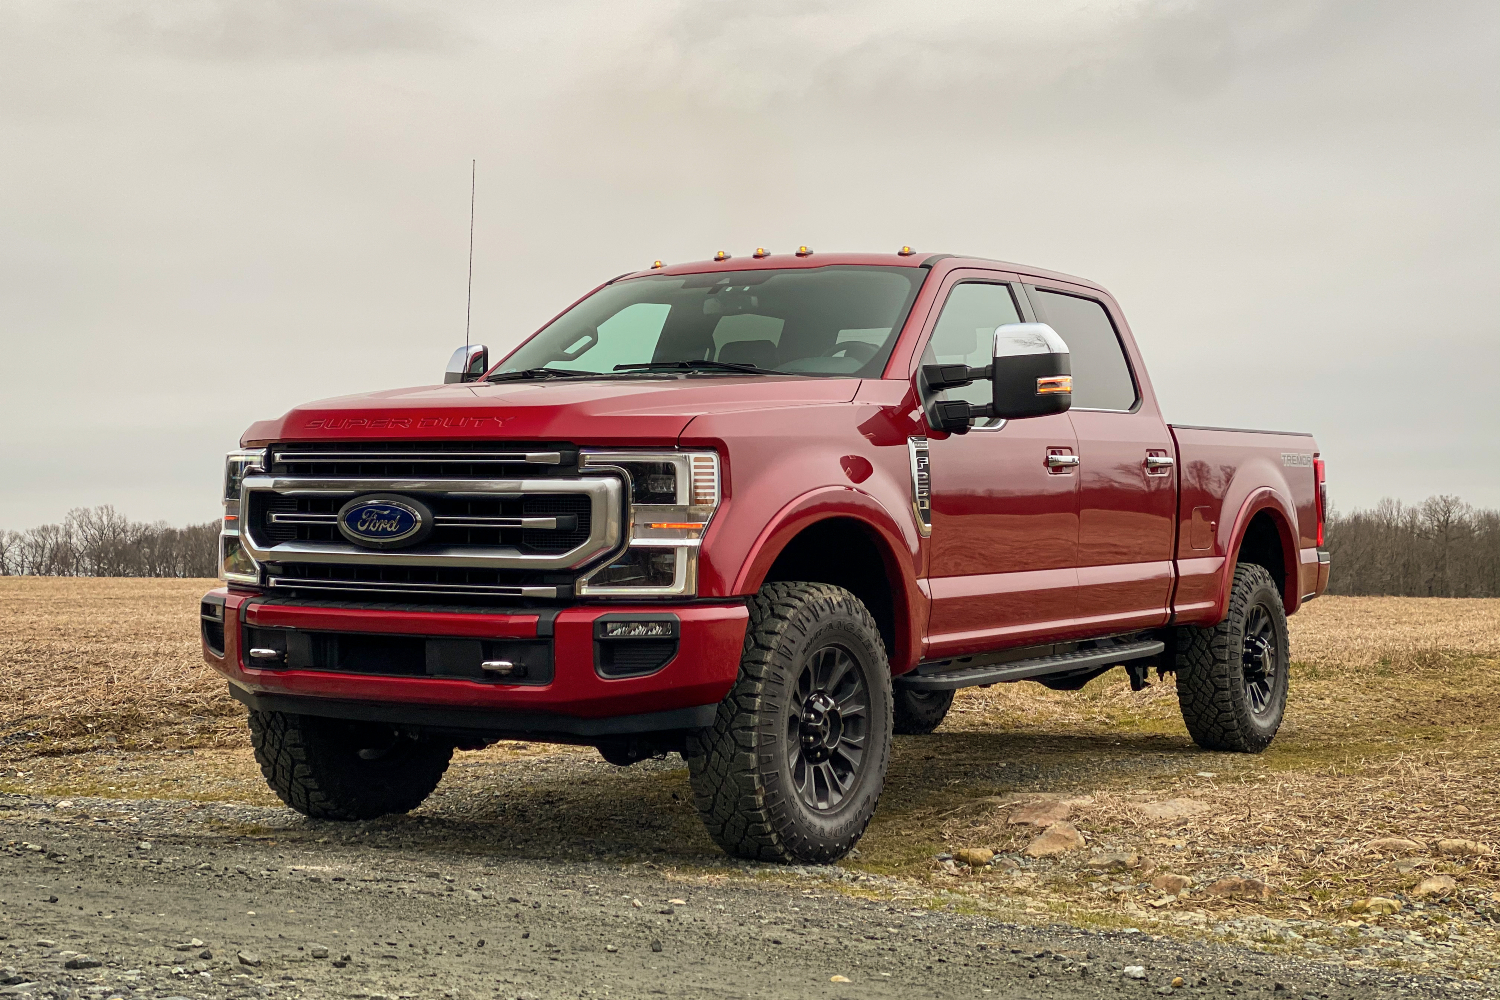 2020 Ford F-250 Tremor Review: A Tonka Truck For Adults - The Manual